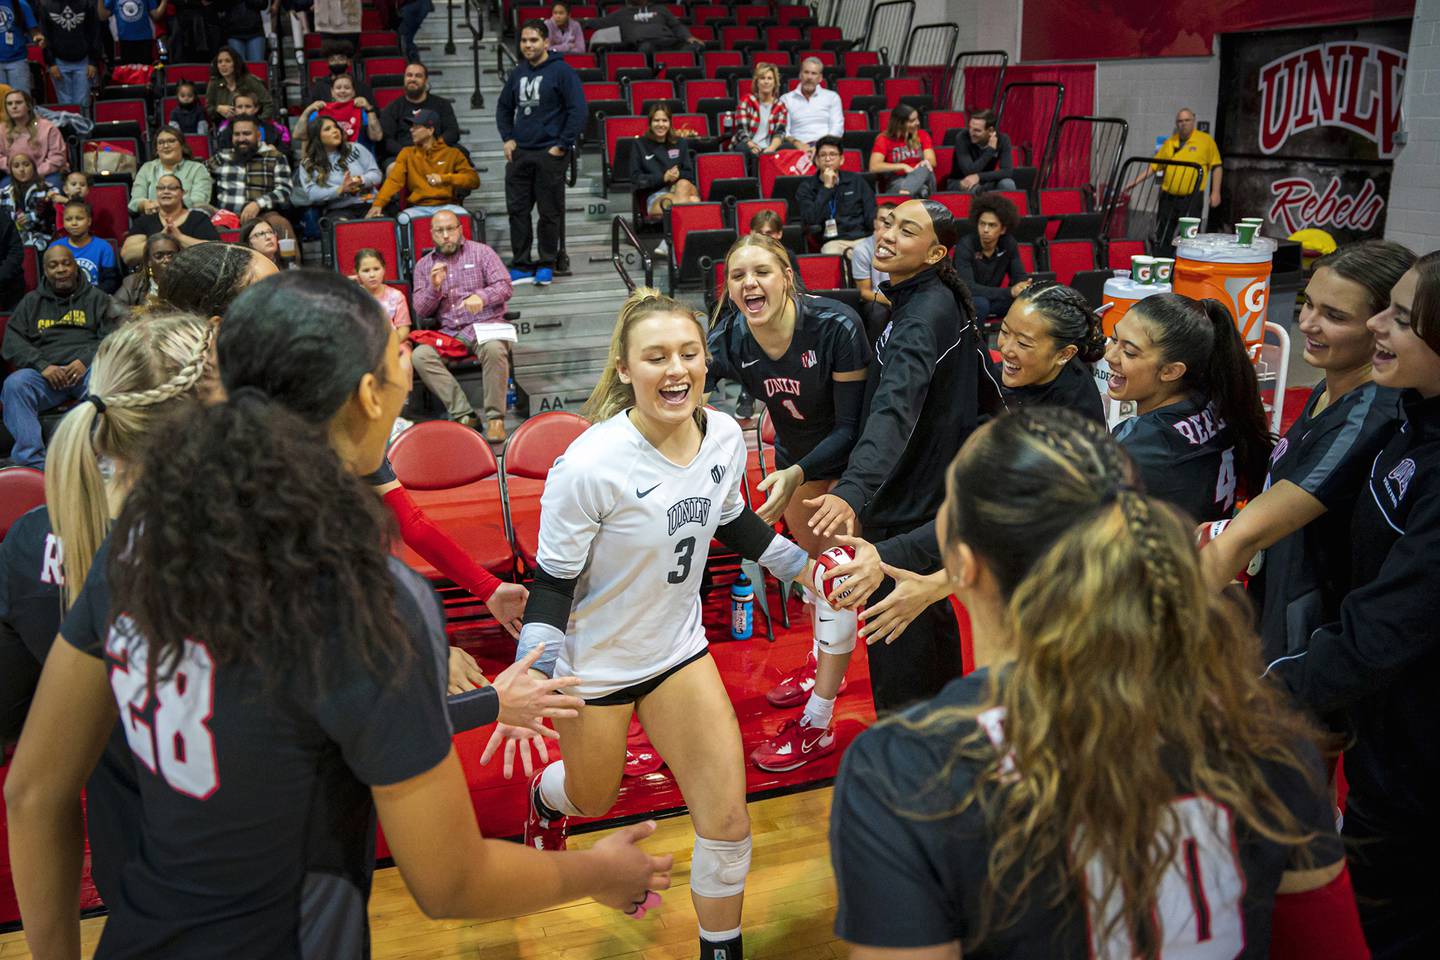 Rock Falls native Maya Sands is introduced as UNLV's starting libero during the Rebels' volleyball match against Wyoming at Cox Pavilion in Las Vegas on Nov. 17, 2022. The Rebels won 3-1 and were crowned the Mountain West regular-season champions. Sands started all season at libero for UNLV, and is transferring to Missouri for next season.